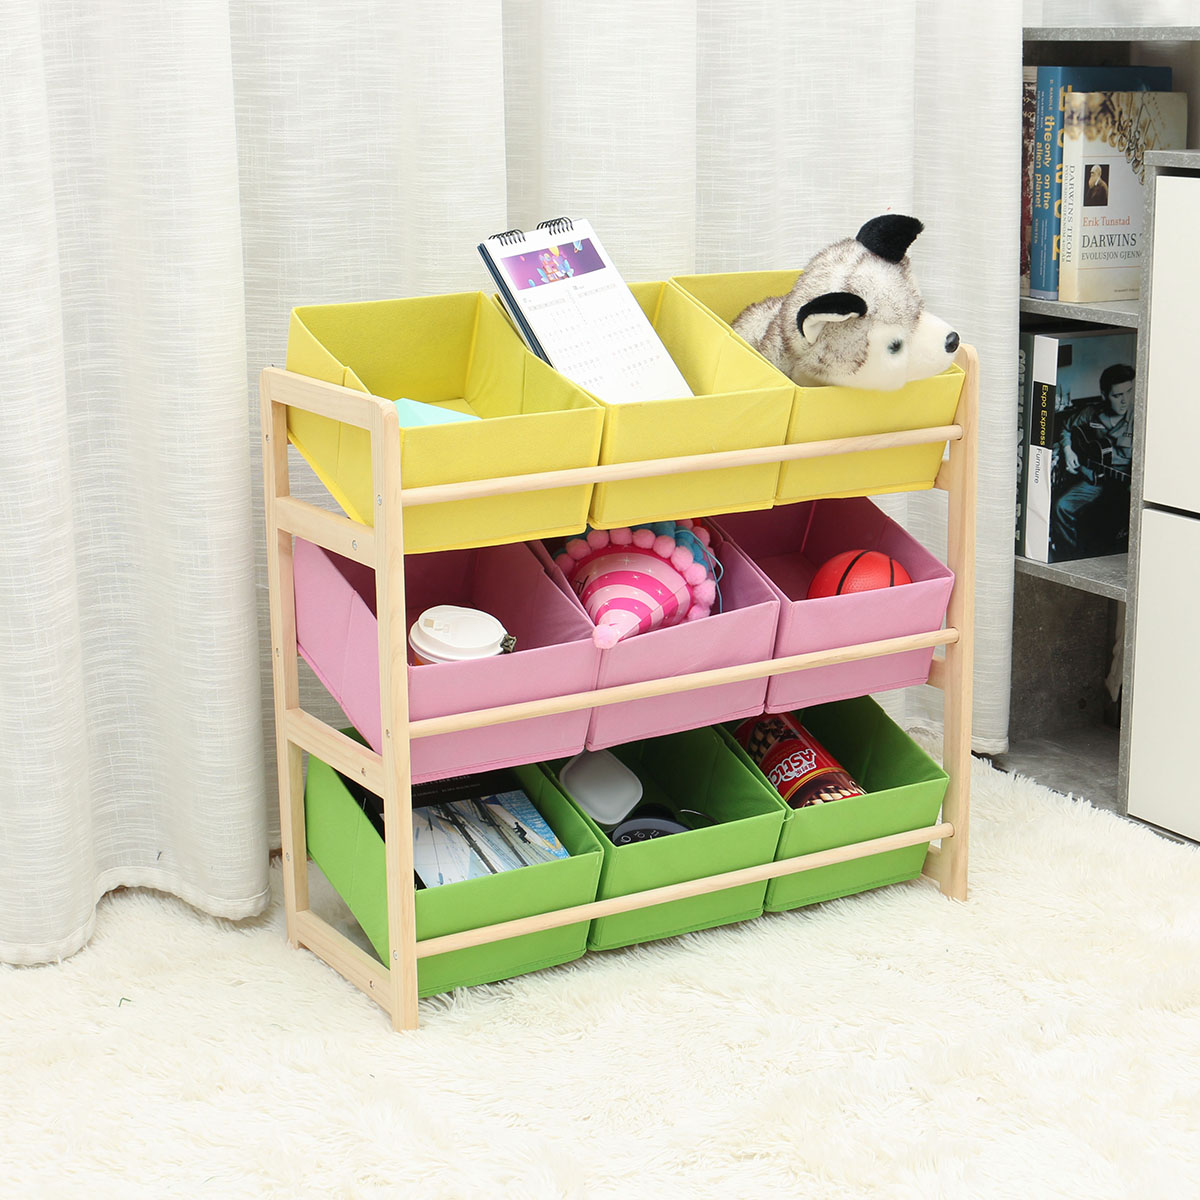 66309CM-Yellow-Pink-Green-Solid-Wood-Childrens-Toy-Rack-Storage-Rack-Toy-Rack-1754652-4